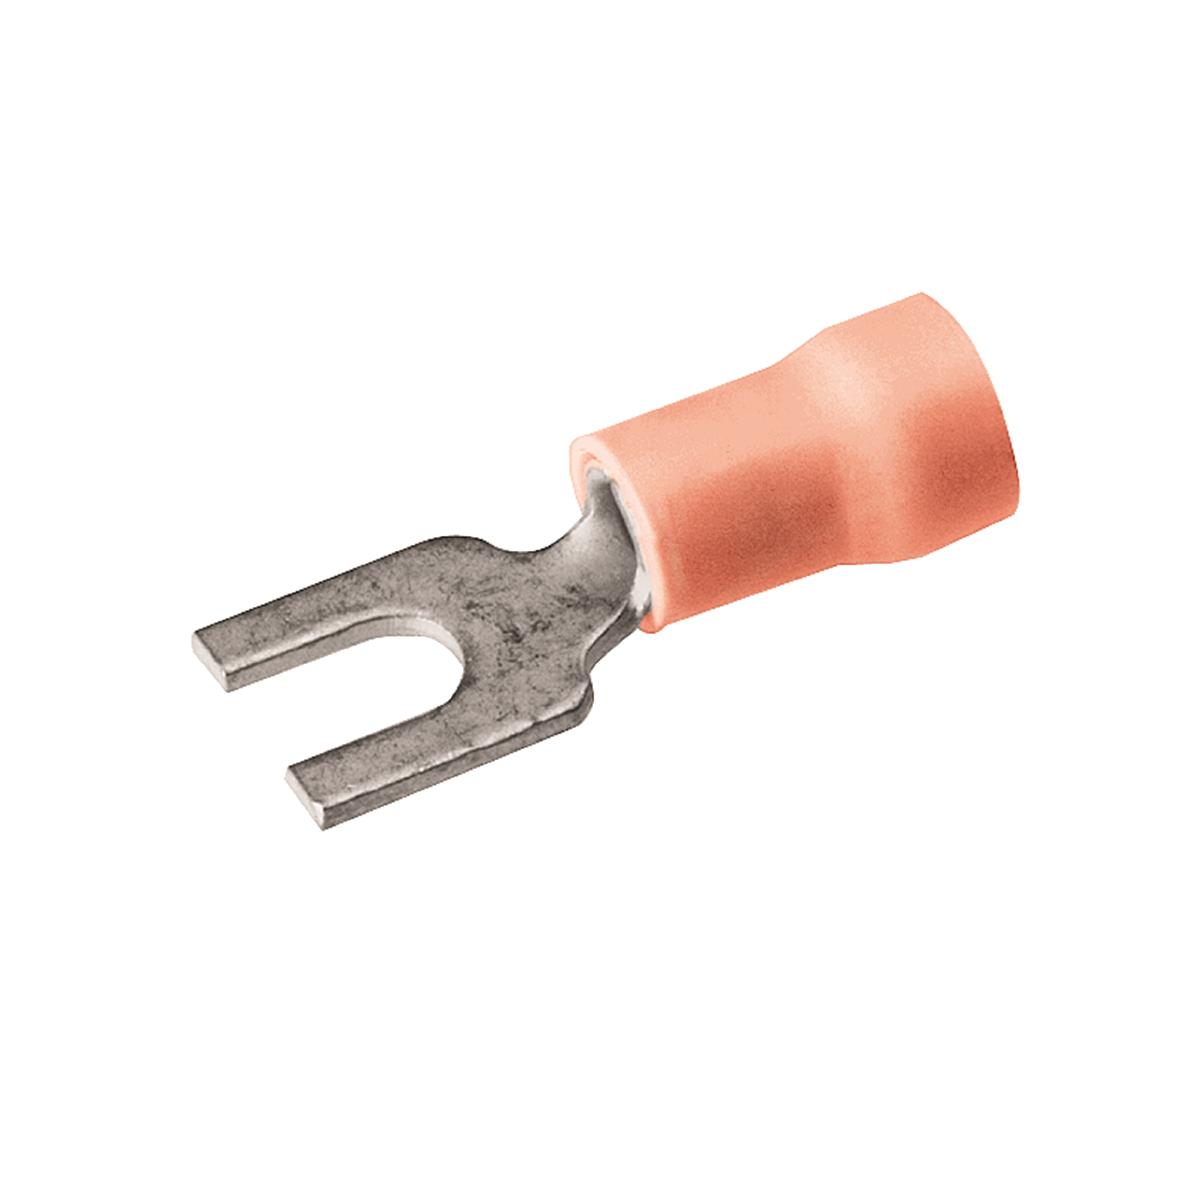 Hubbell BA16EF8 Vinyl Fork Terminal For 22 - 16 AWG.  ; Fork terminals are constructed of pure electrolytic copper ; Long brazed seam barrel with deep V groove inner serations for optimum conductivity, reliability and holding power after crimping ; Fork tongue design for